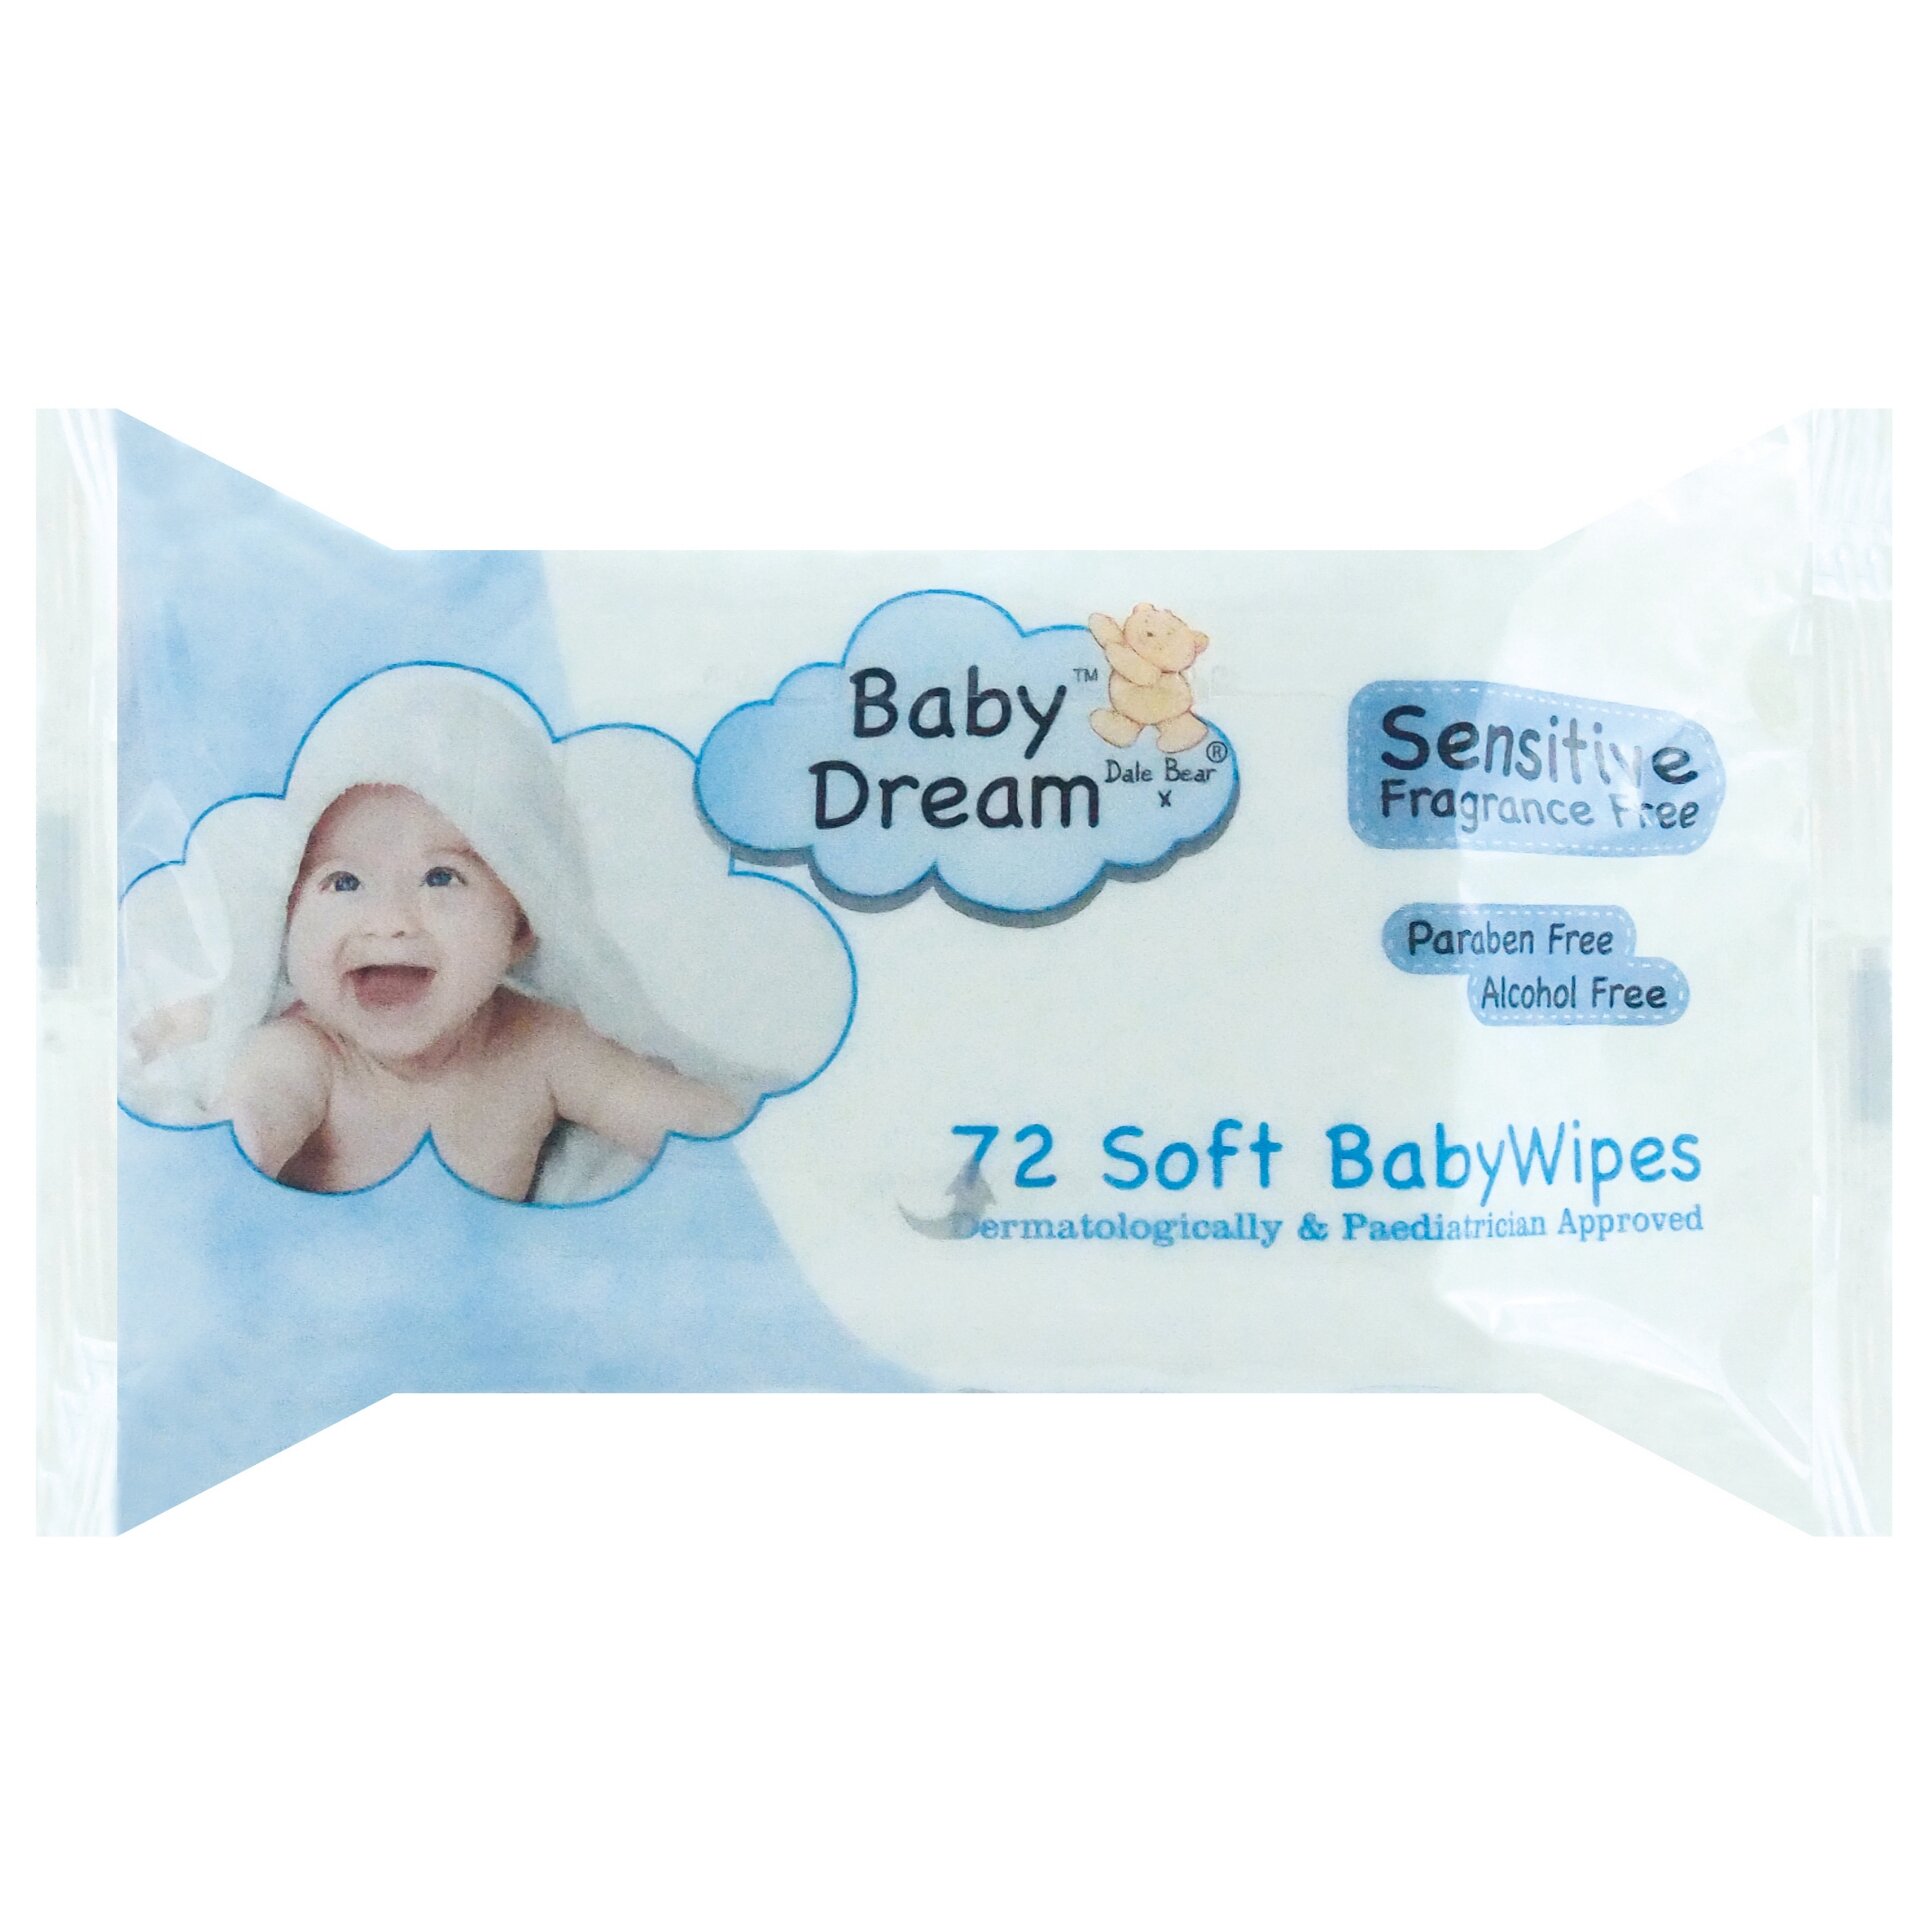 Baby Dreams Soft Baby Wipes Sensitive Fragrance Free 72 Pack - Case of 12